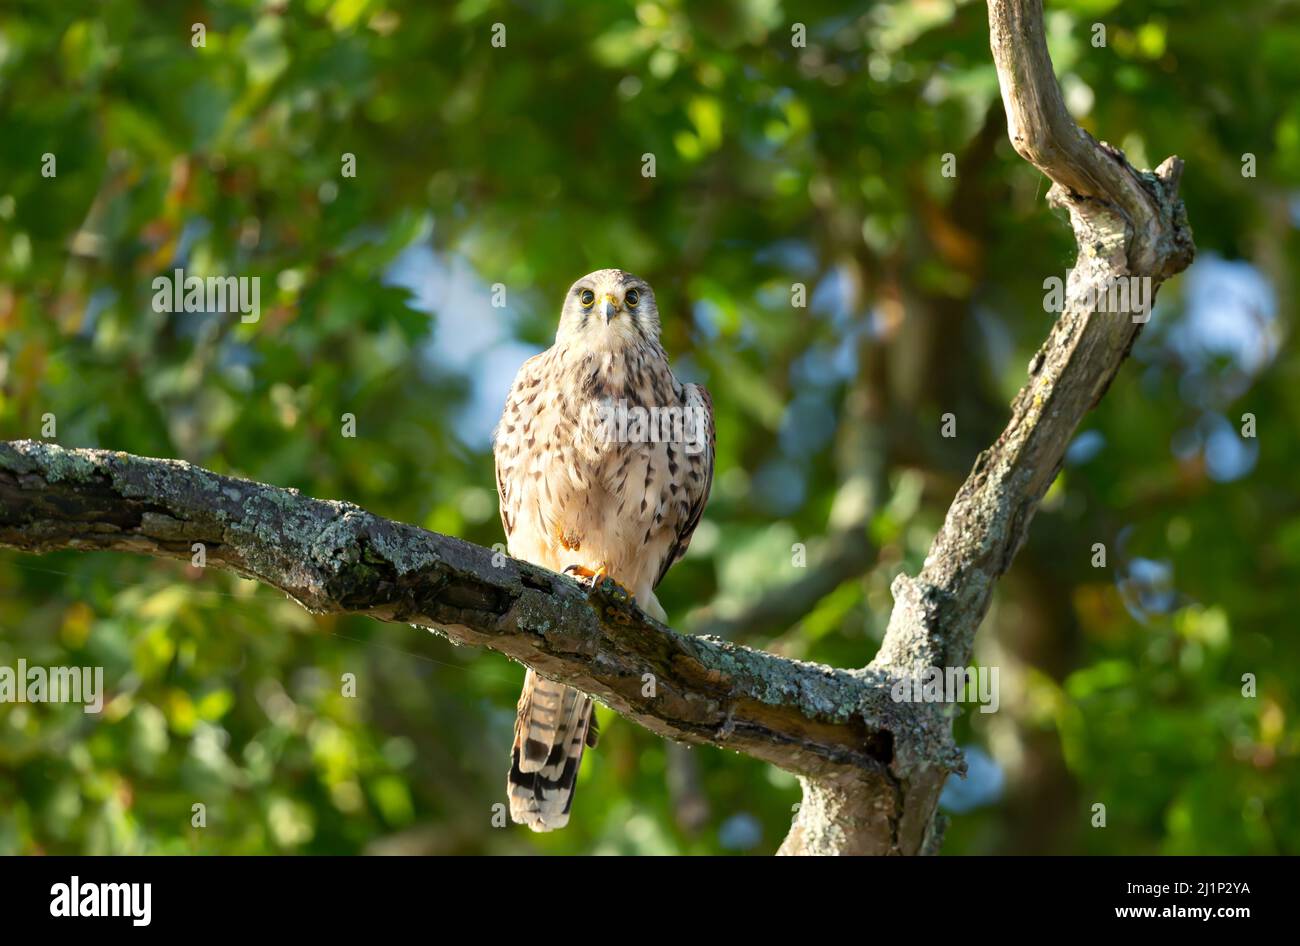 Close up of a common kestrel perched on a tree branch, United Kingdom. Stock Photo